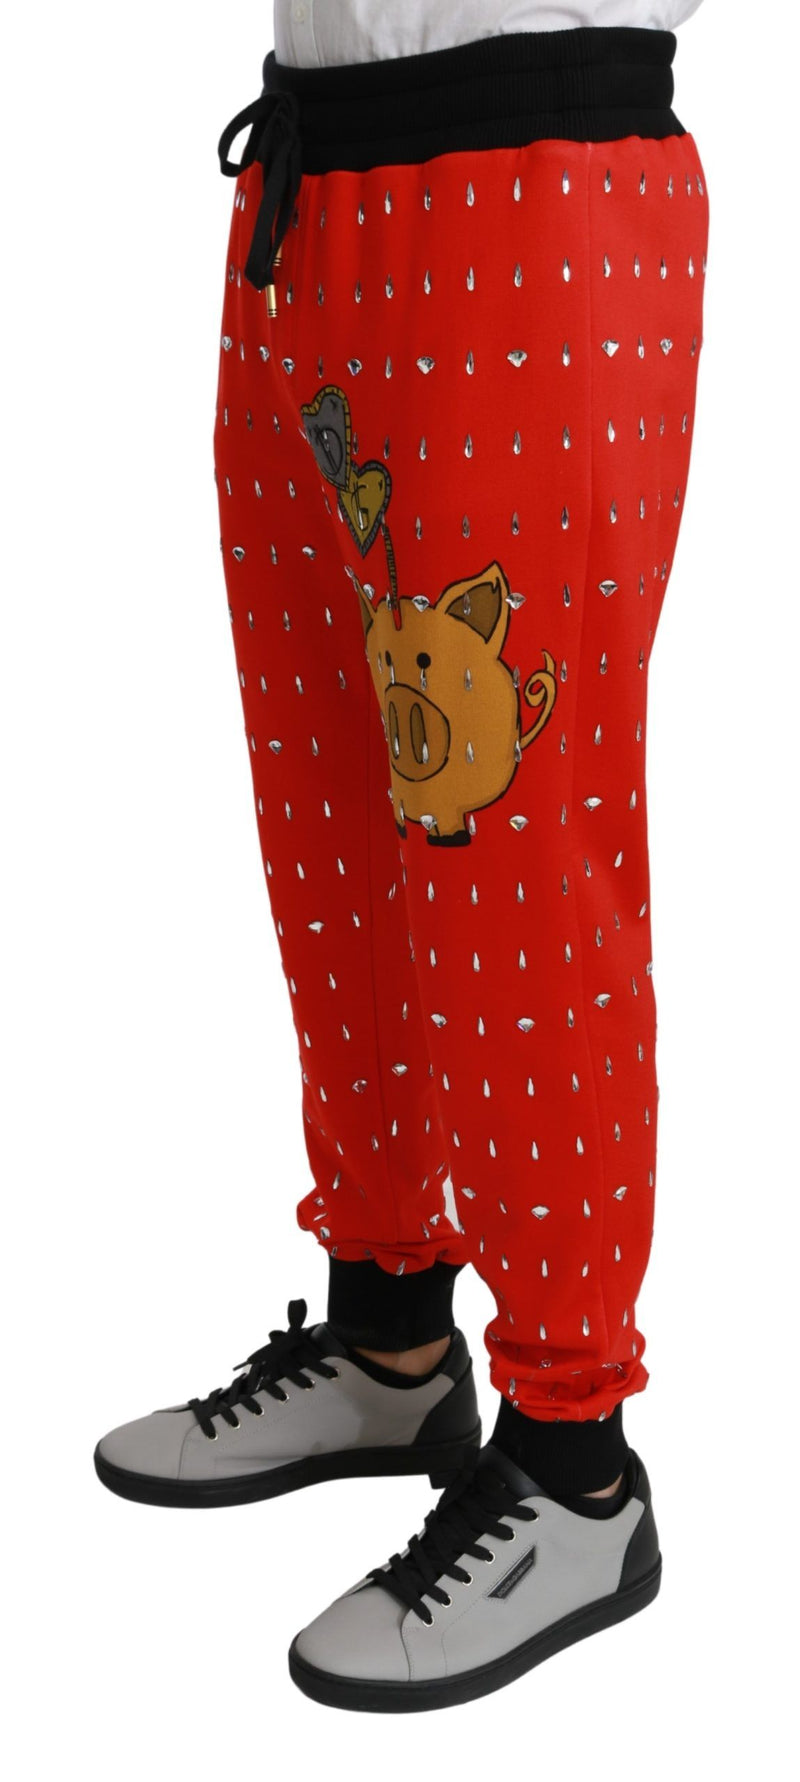 Red Piggy Bank Cotton Crystal Trousers Pants